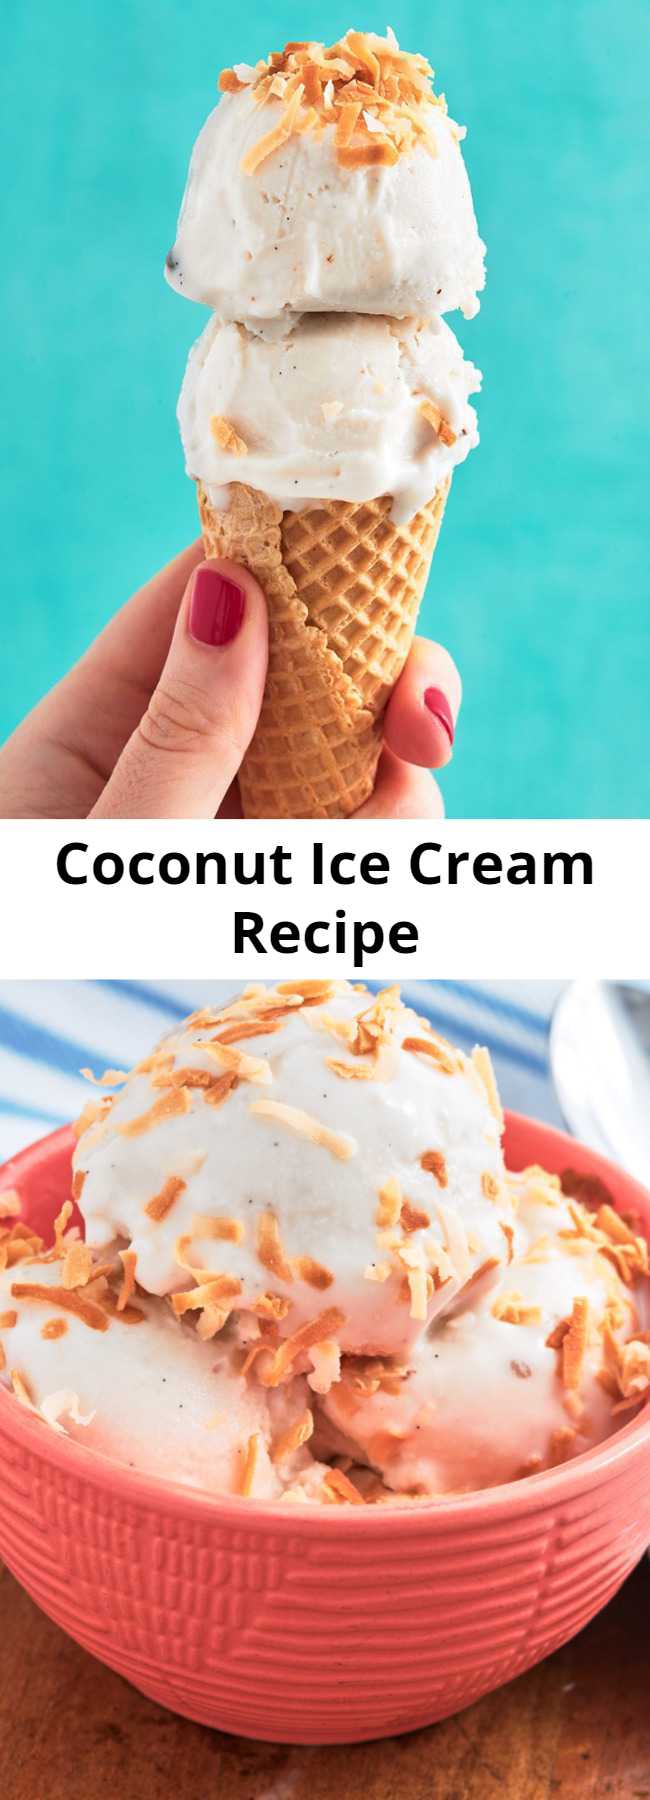 Coconut Ice Cream Recipe - Coconut Ice Cream is completely vegan and extremely smooth. Dairy free, vegan, and still so good.